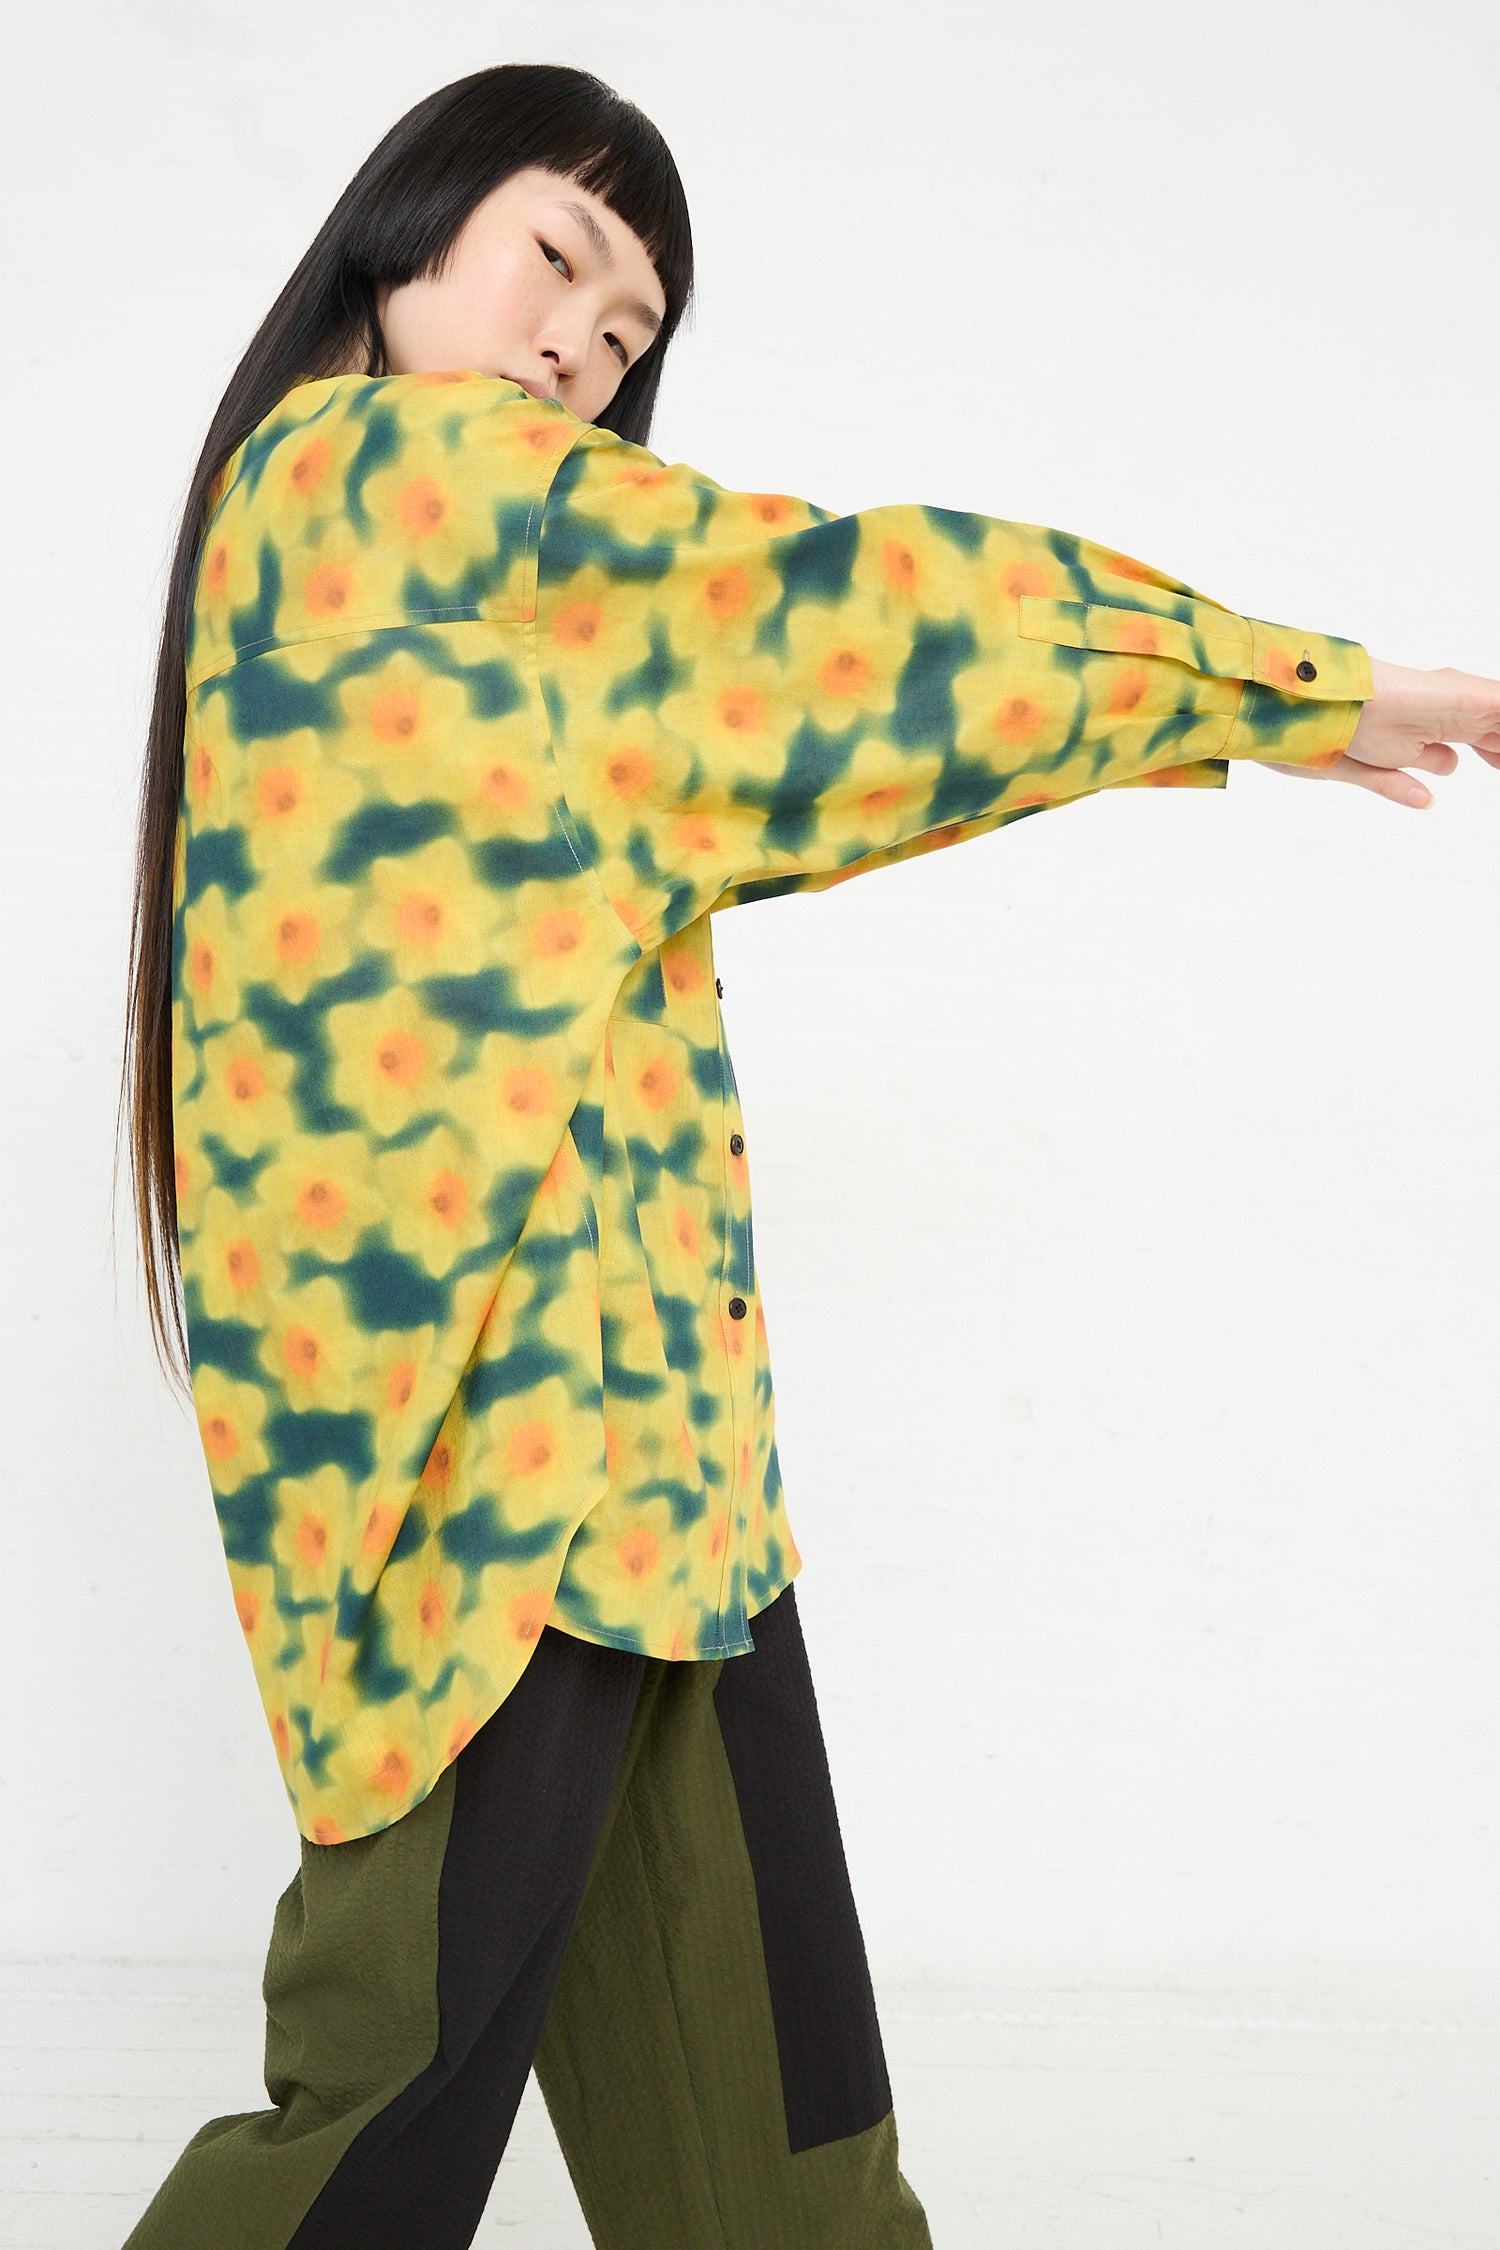 A woman in a KasMaria Cotton Linen Large Front Pocket Shirt in Daffodil Print extending her arm to the side against a white background.